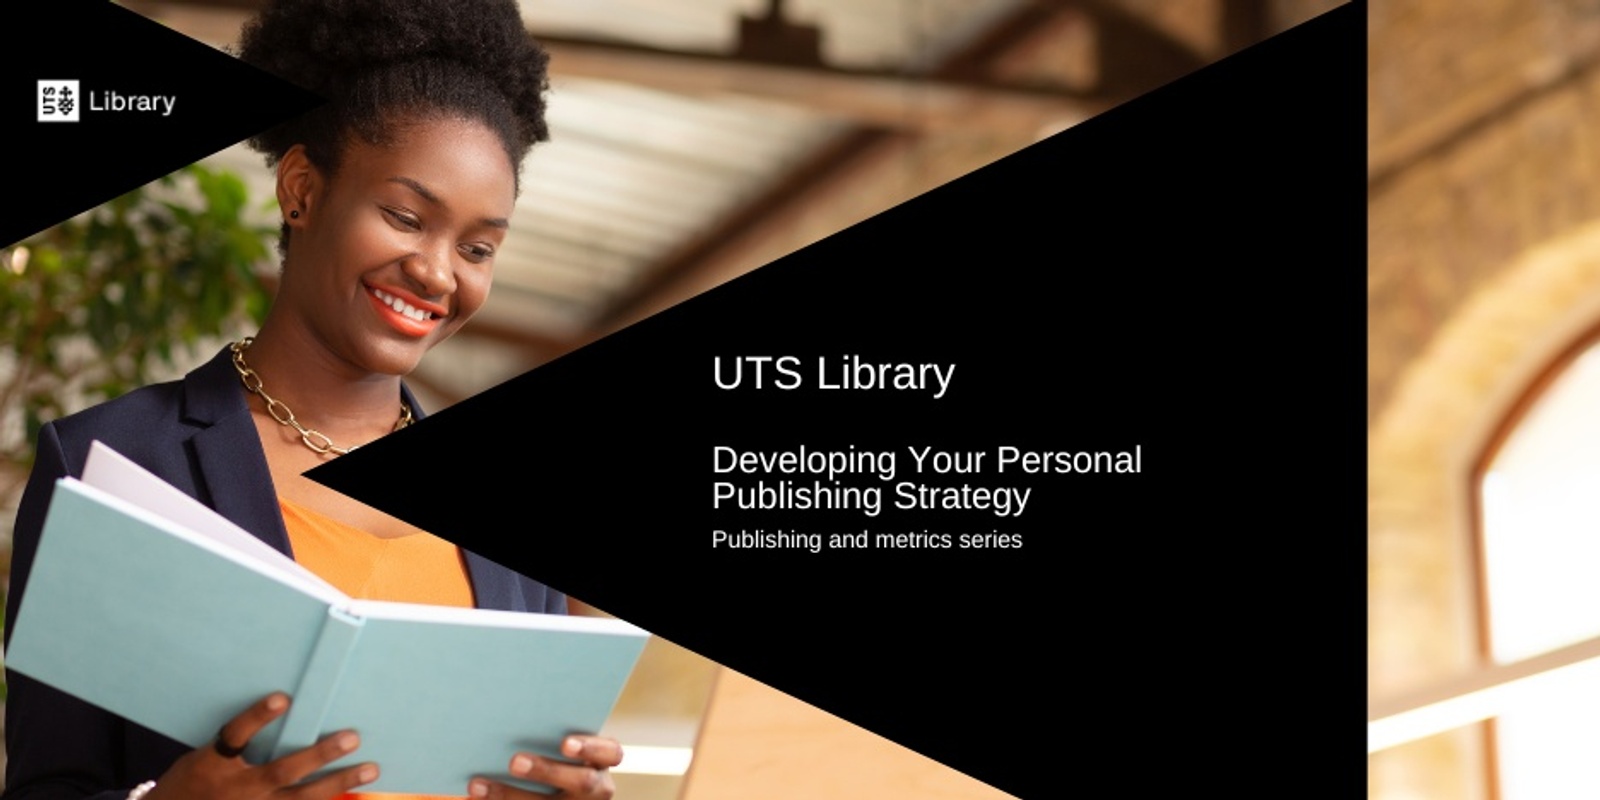 Developing Your Personal Publishing Strategy